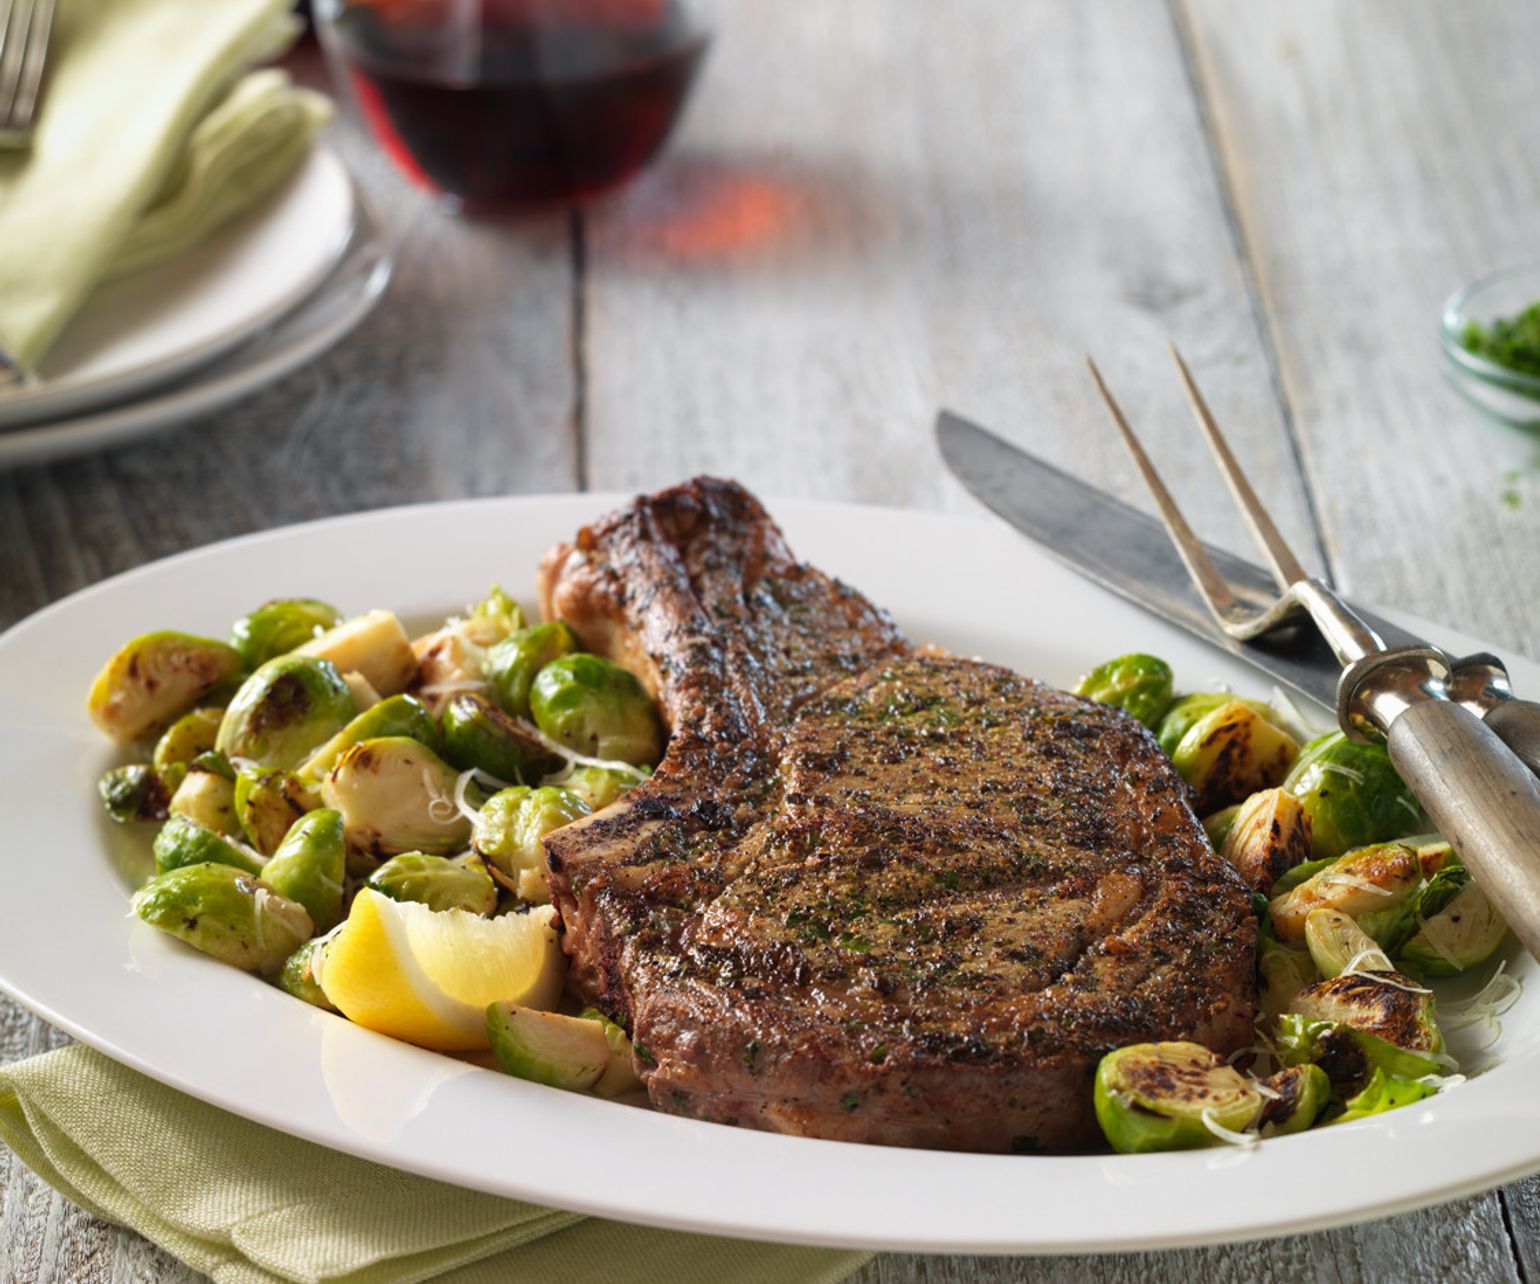 Ribeye Steak and Sautéed Brussels Sprout Skillet Dinner for Two